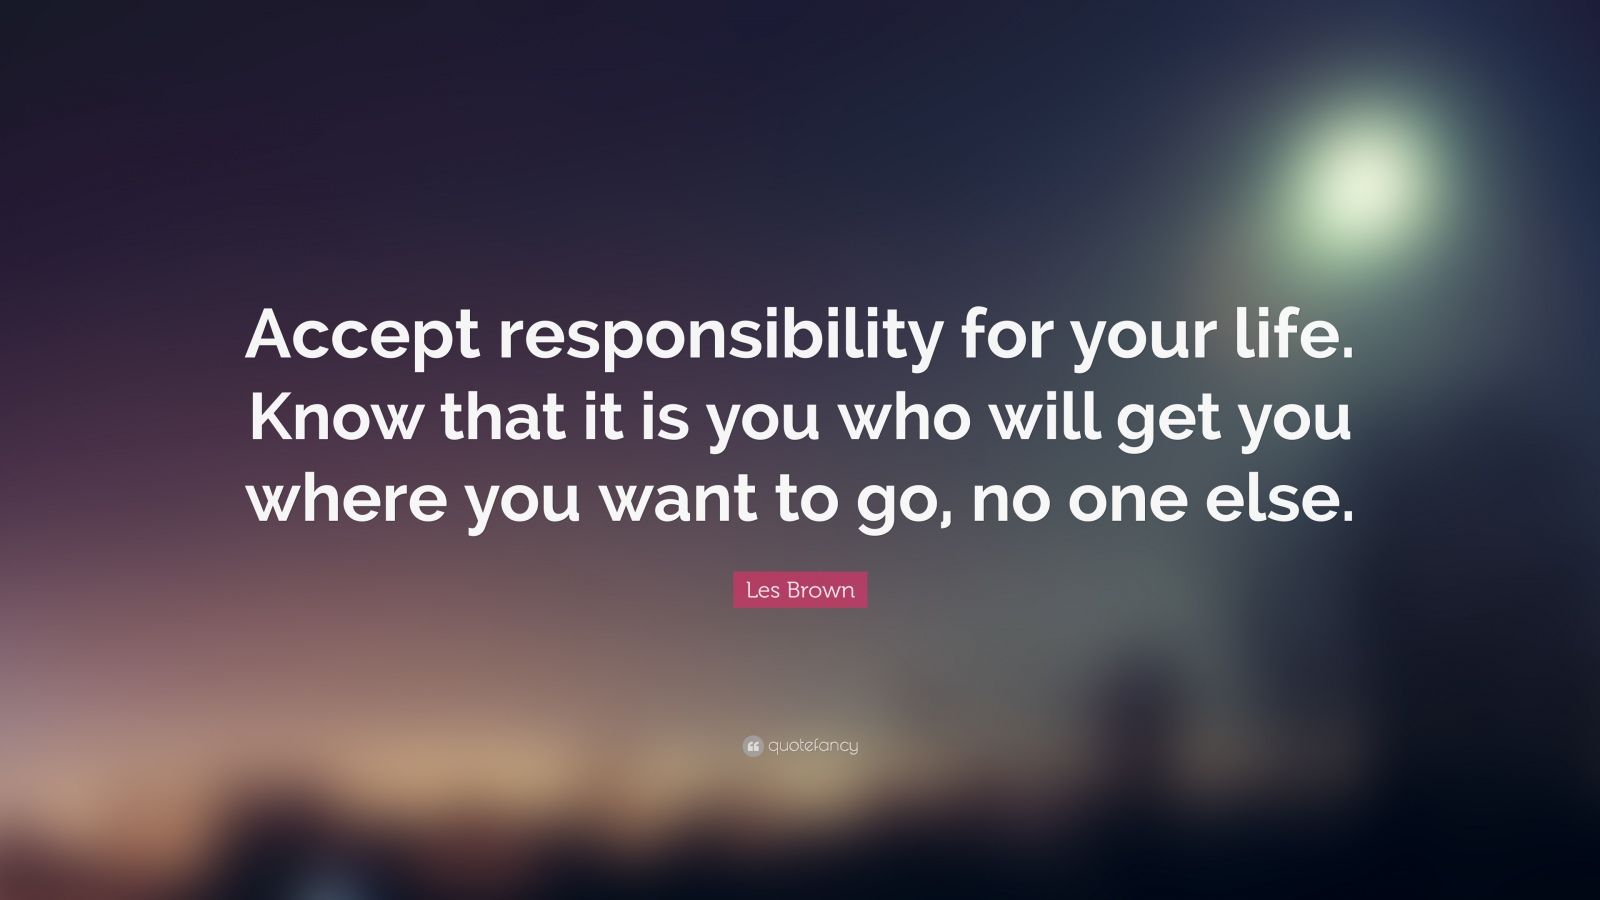 Les Brown Quote: “Accept responsibility for your life. Know that it is